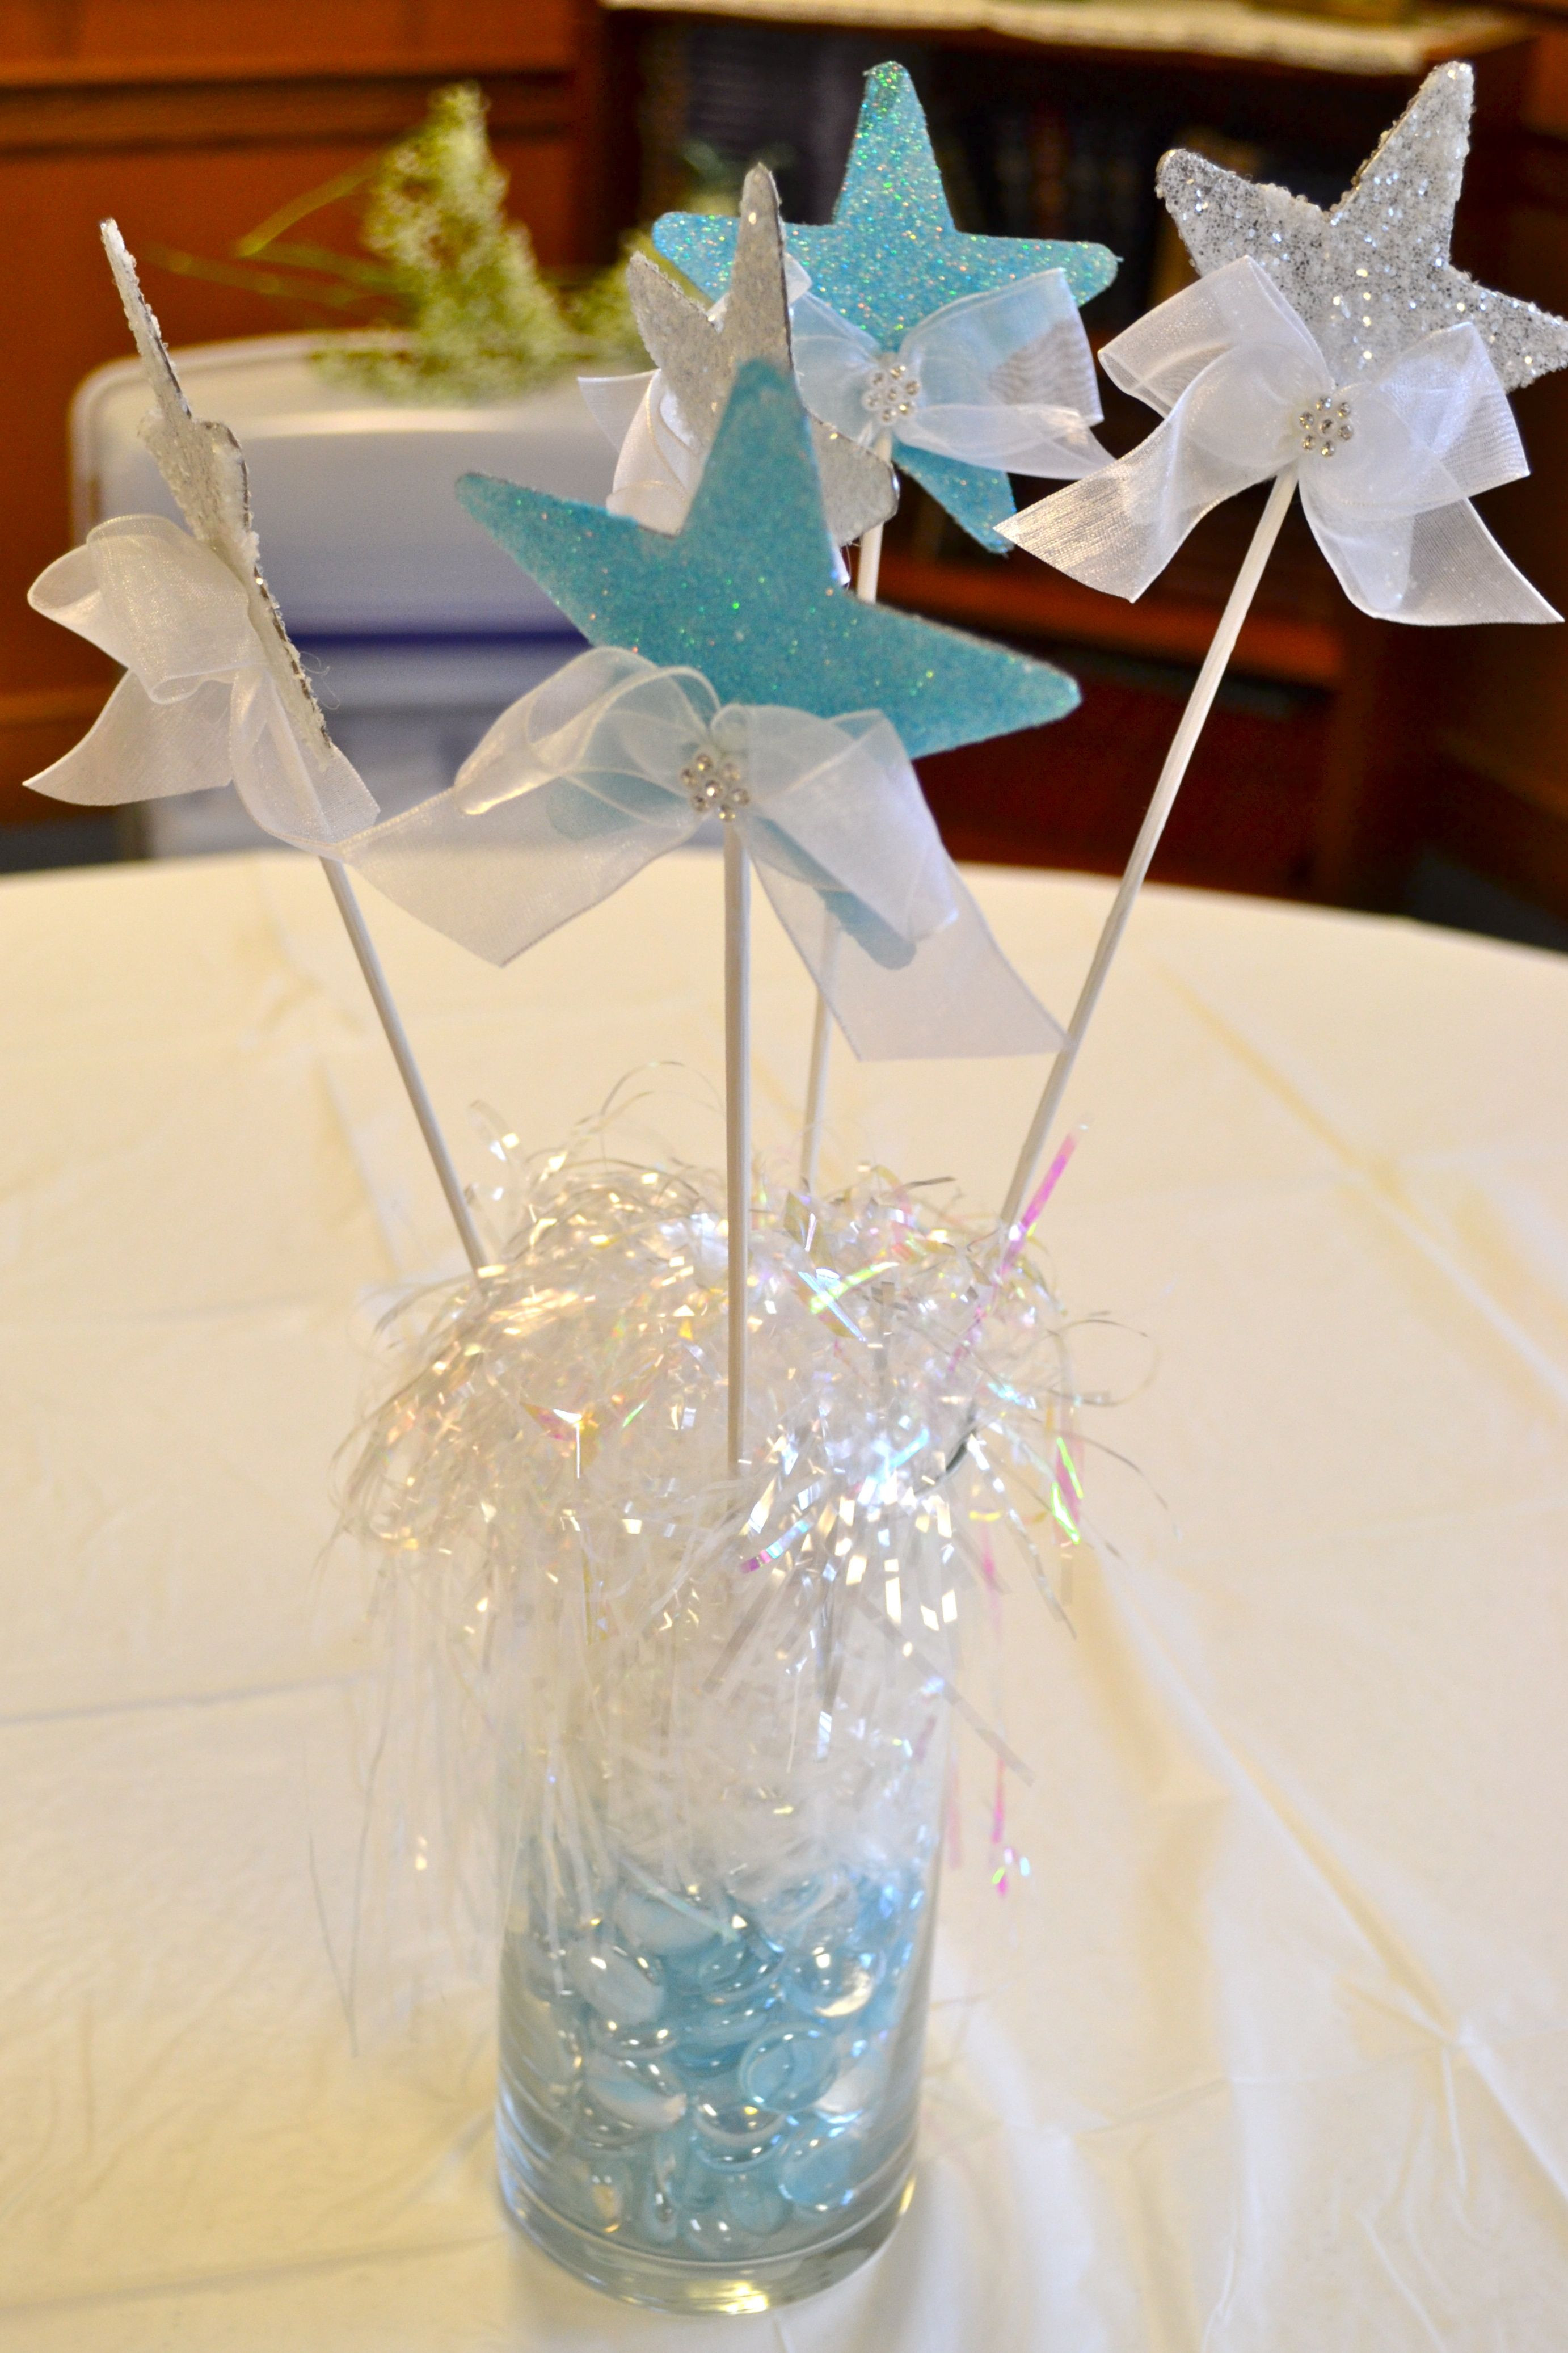 12 Amazing Glass Baby Block Vase 2024 free download glass baby block vase of little star centerpieces empty glass vase filled with silver intended for little star centerpieces empty glass vase filled with silver white and blue shiny stuff att